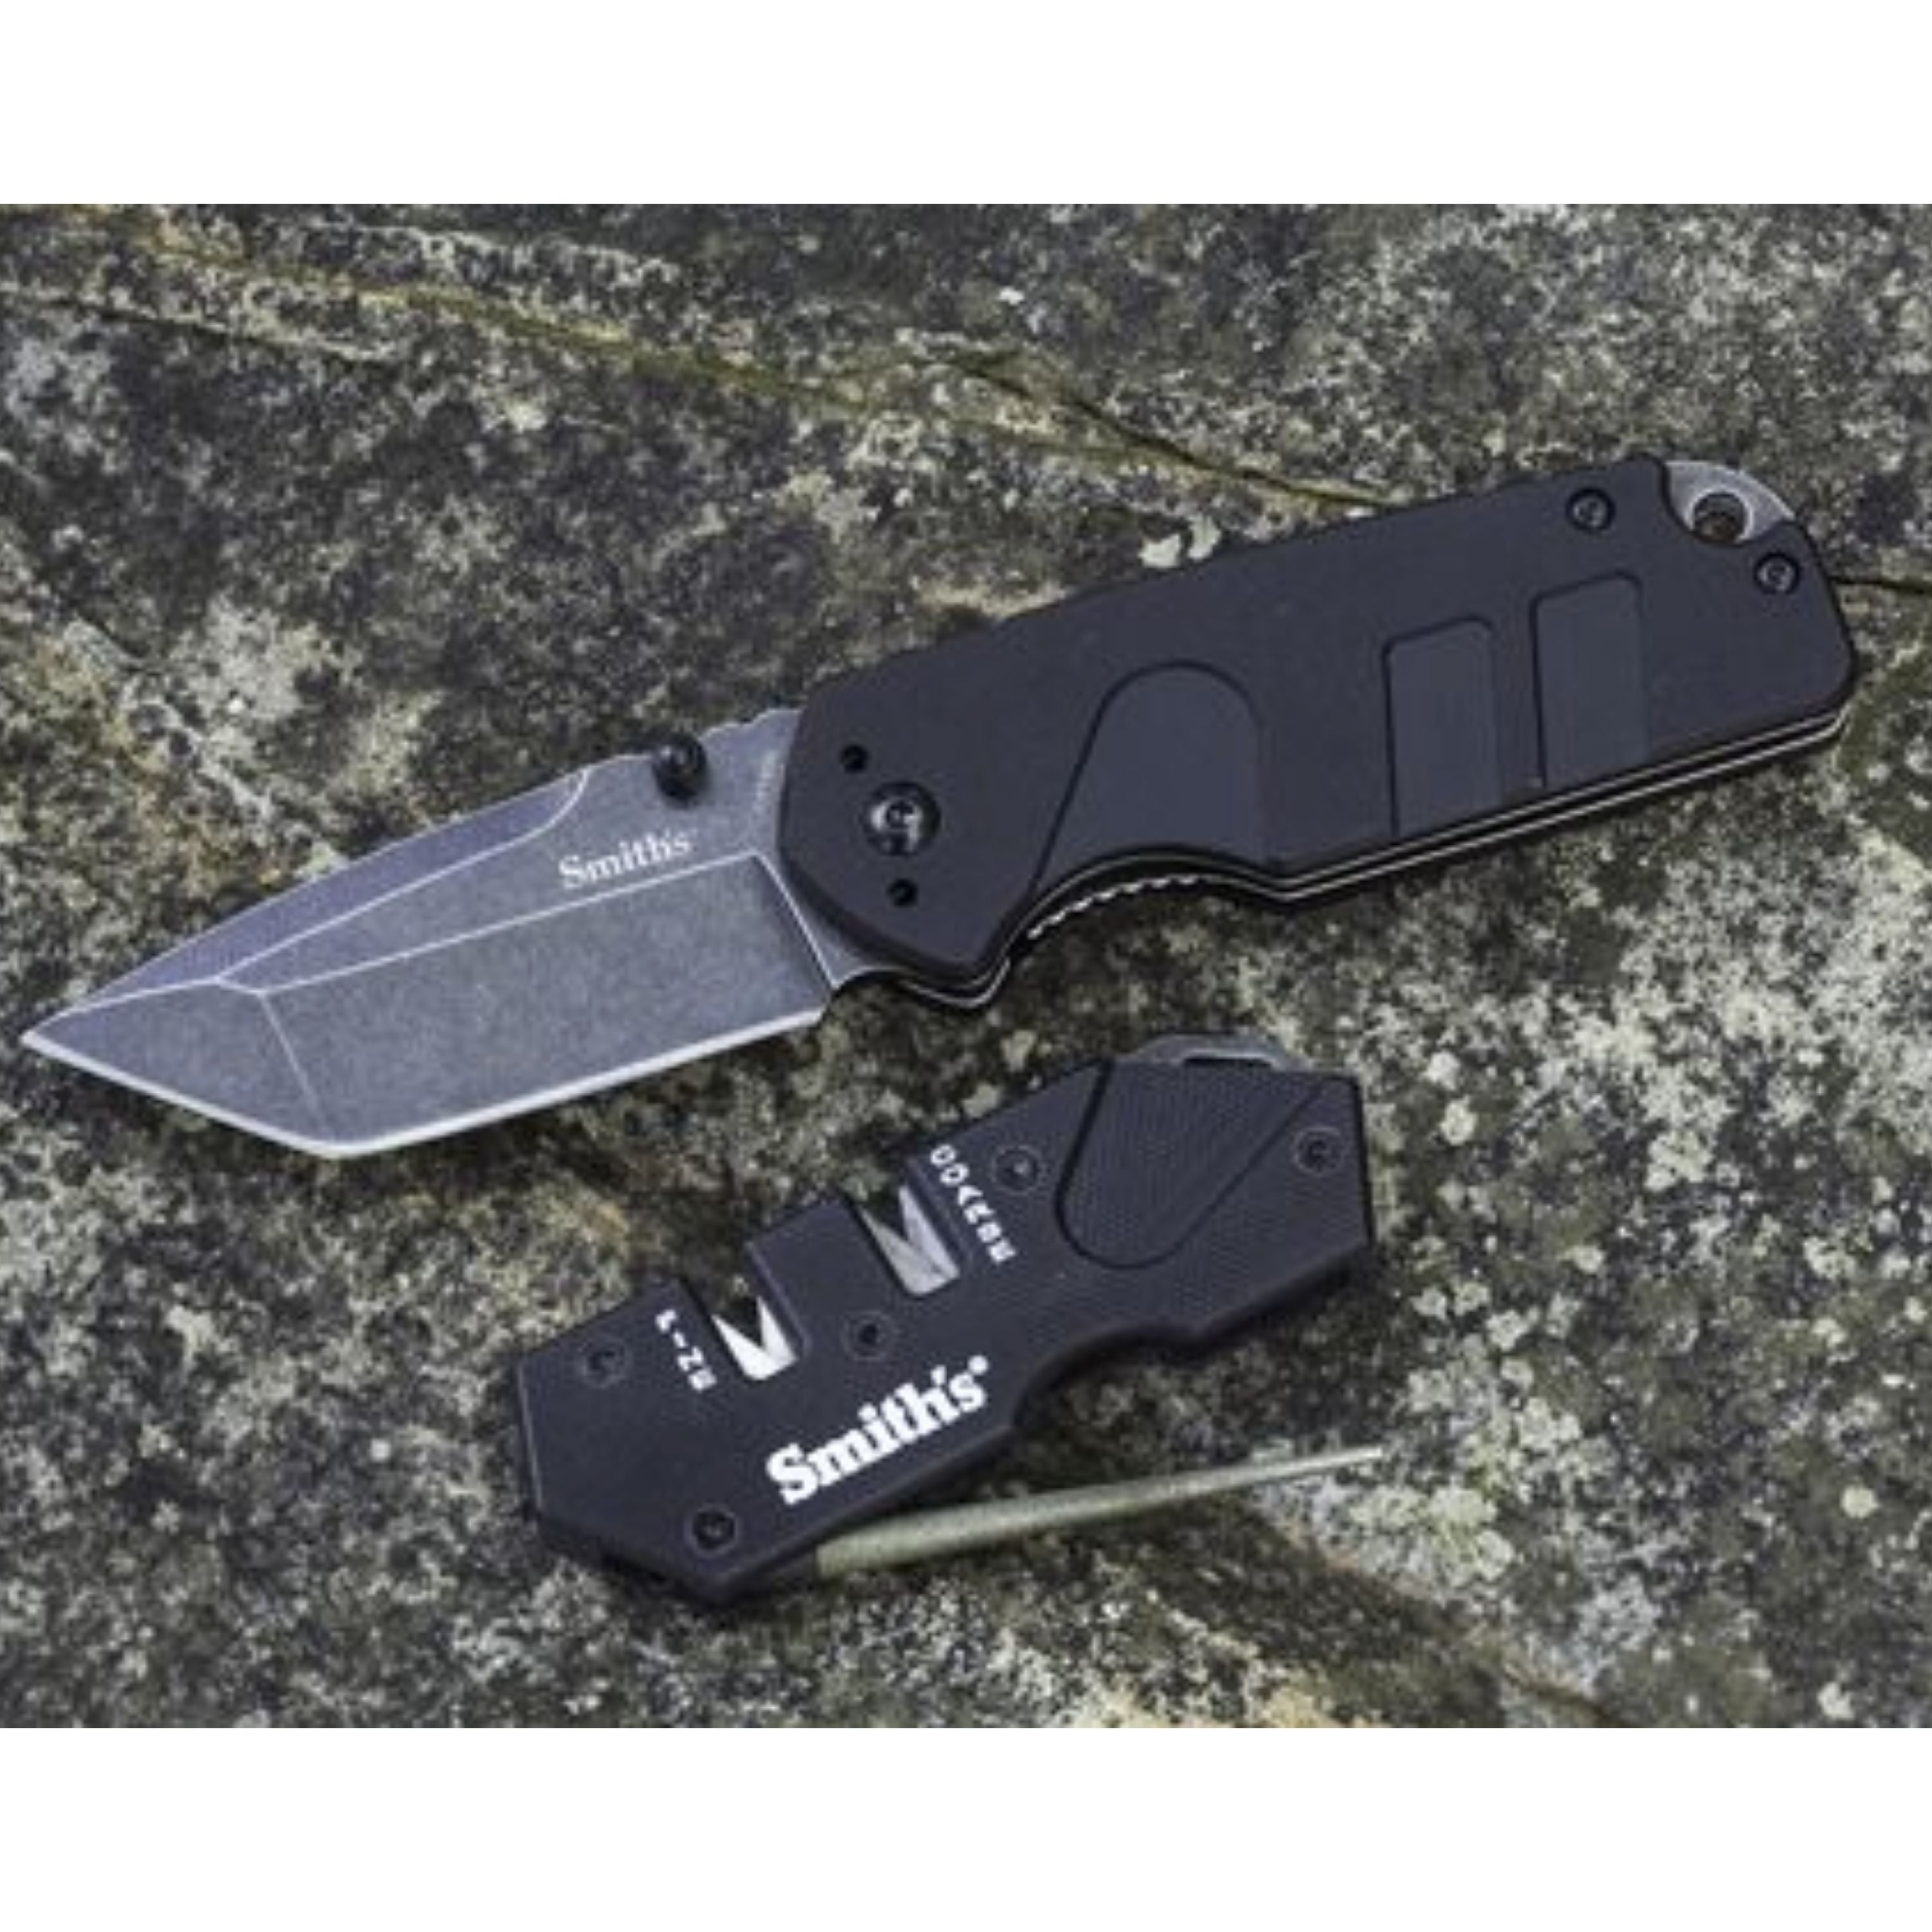 "Campaign" with PP1-mini tactical combo black